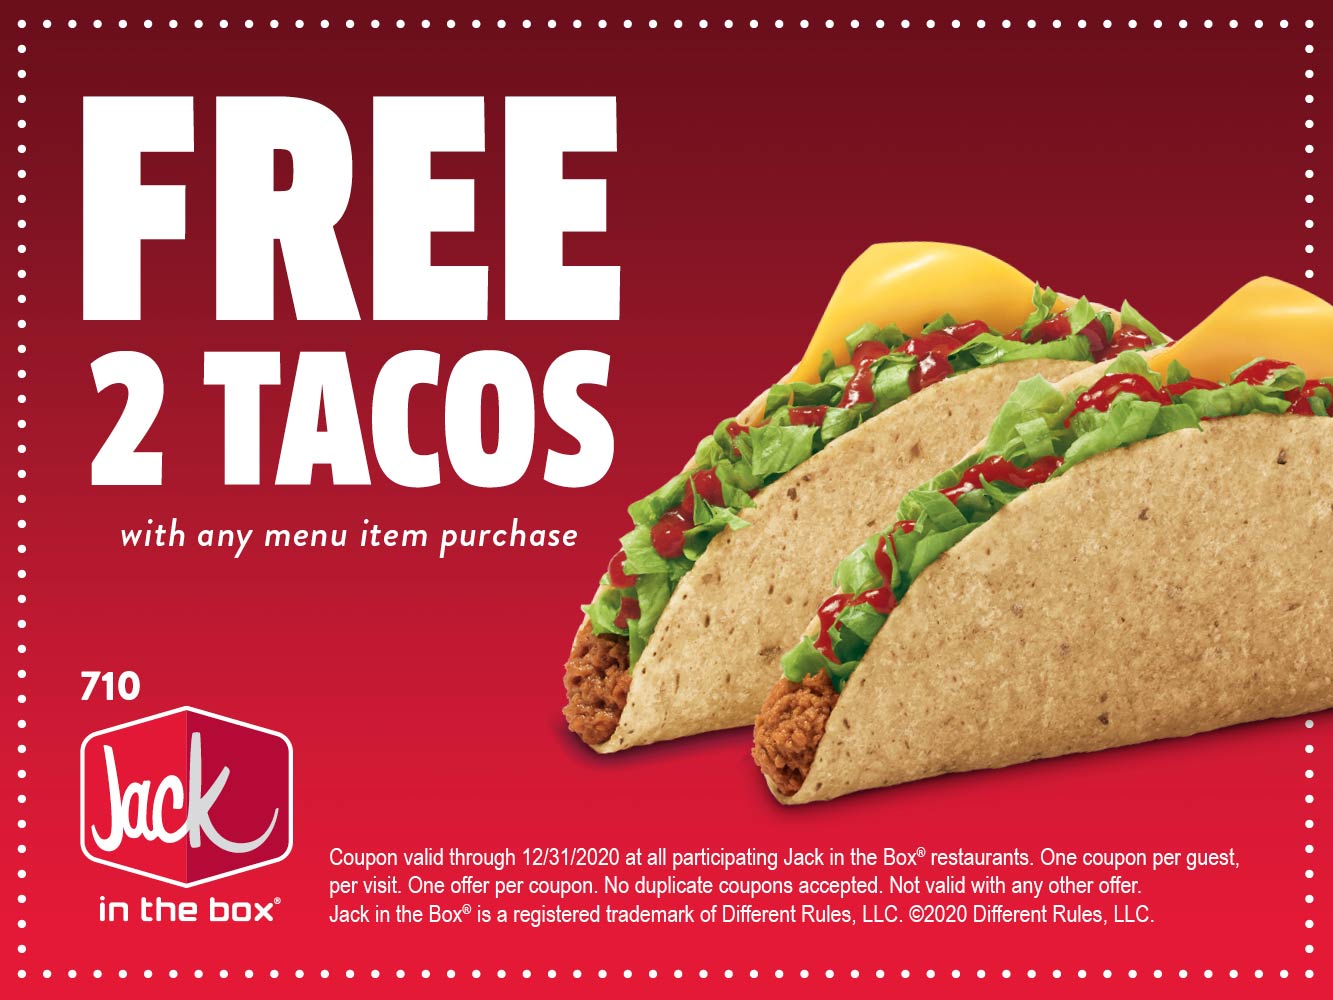 2 free tacos with any purchase all year at Jack in the Box restaurants